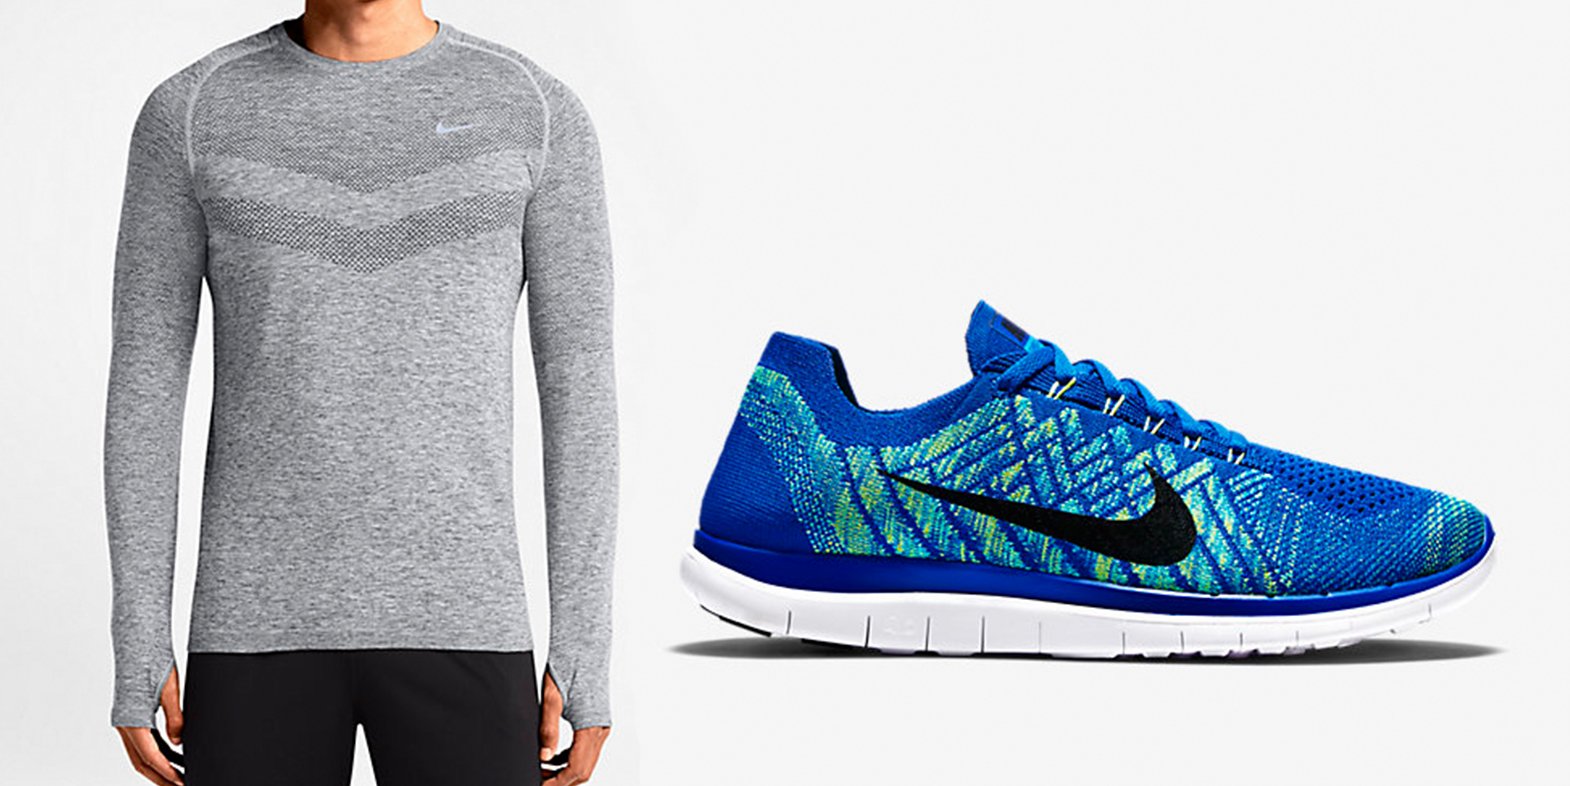 Nublado Empuje combustible Athletic Apparel: Nike extra 20% off clearance - Flyknit 4.0 Shoes $68  (Orig. $120), Reebok Outlet 50% off